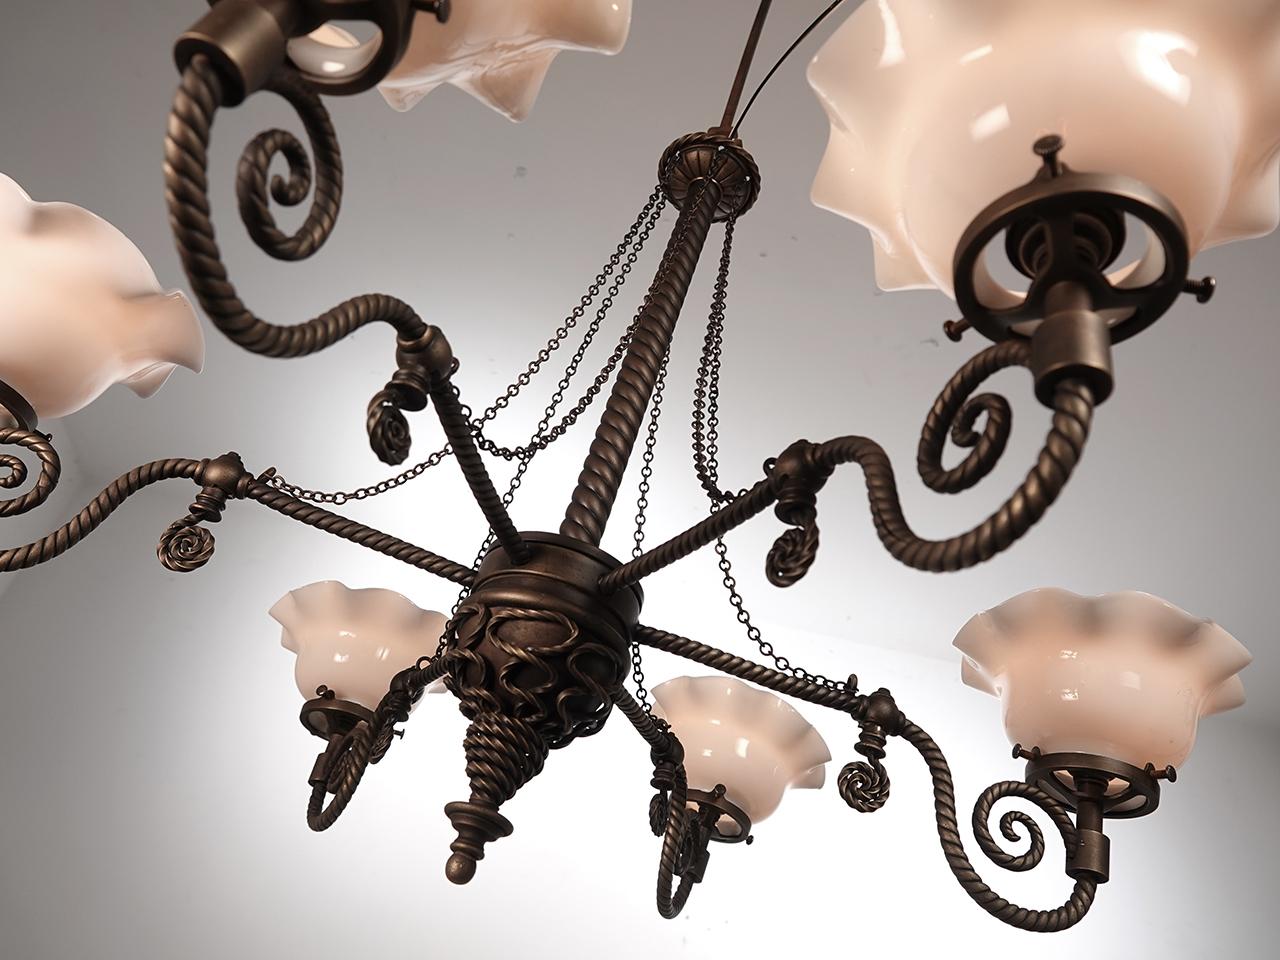 The light twisted pipe and additional twisted applied detail give this lamp its unique feel. The spiral finial ends give the lamp a Dr. Suess quality. Each arm has been wired to take an E12 candelabra bulb lighting a milk glass petticoat shade.